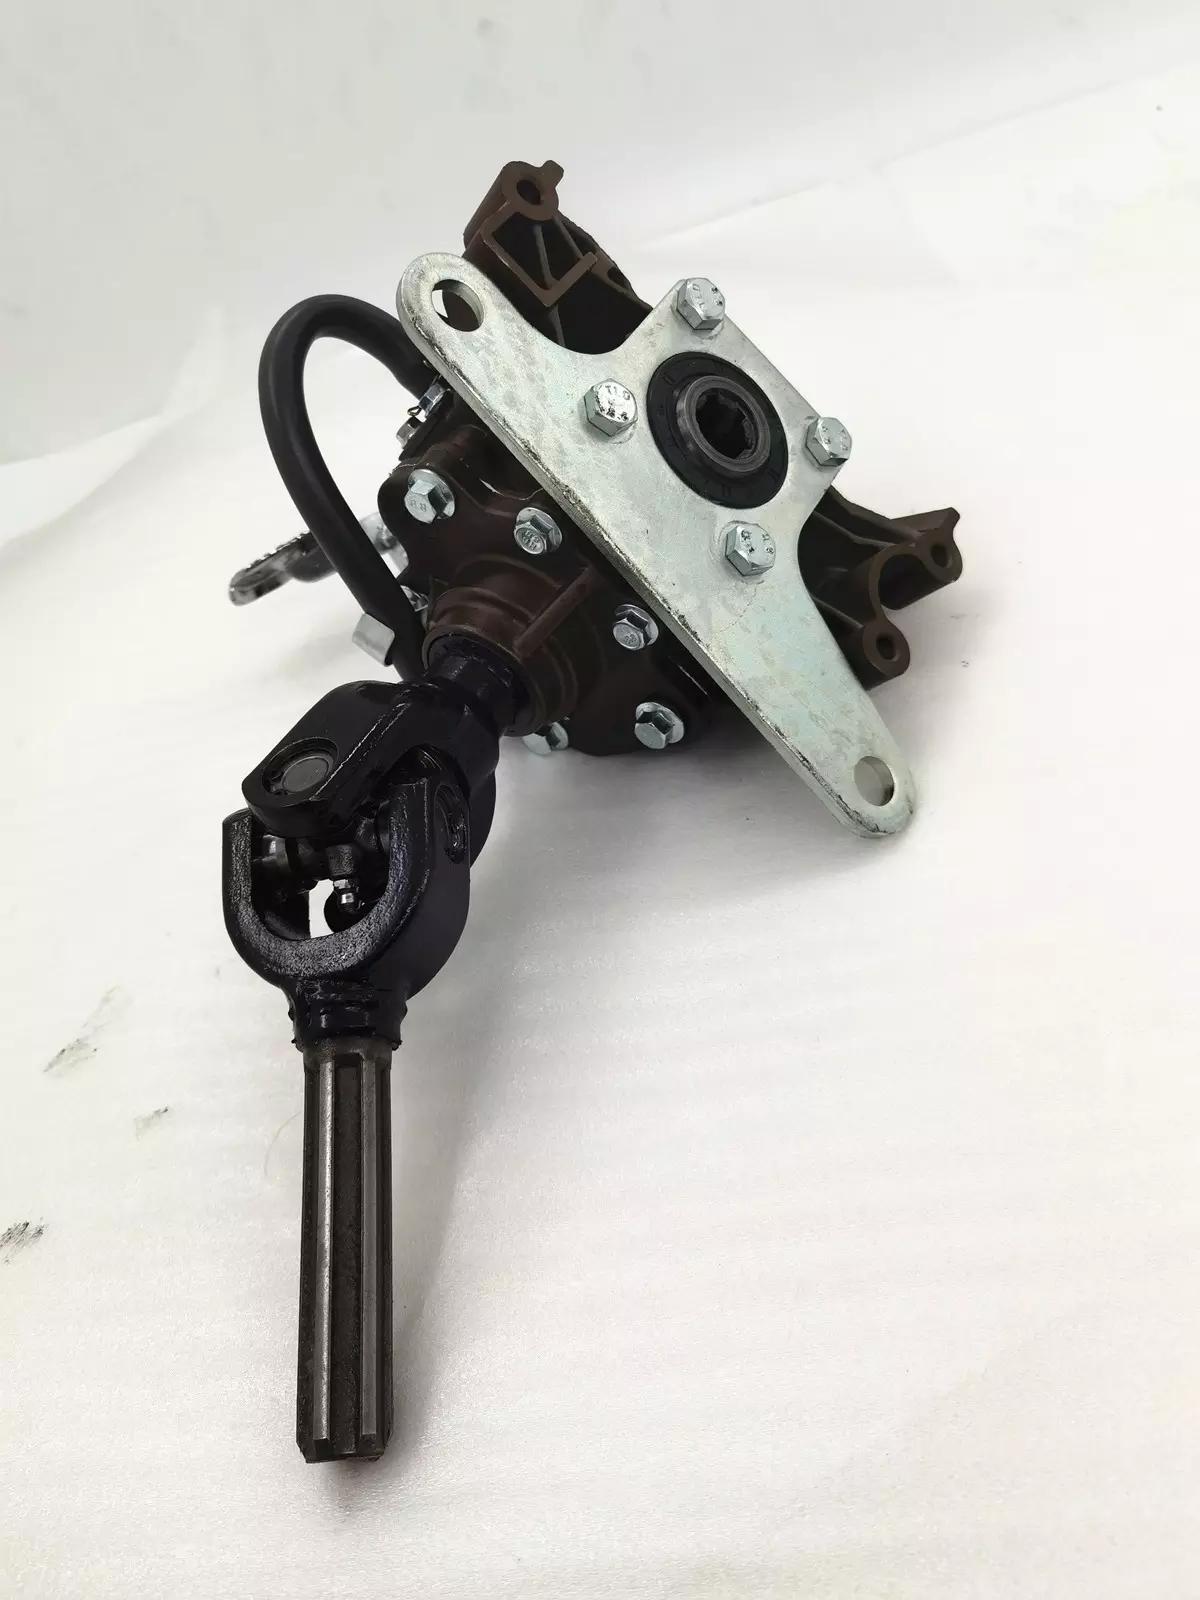 DAYANG exquisite ChuanYu 280 reverse gear box for  Lifan Engine Motor Trike 3 Wheel Motorcycle Tricycle with big size base plate